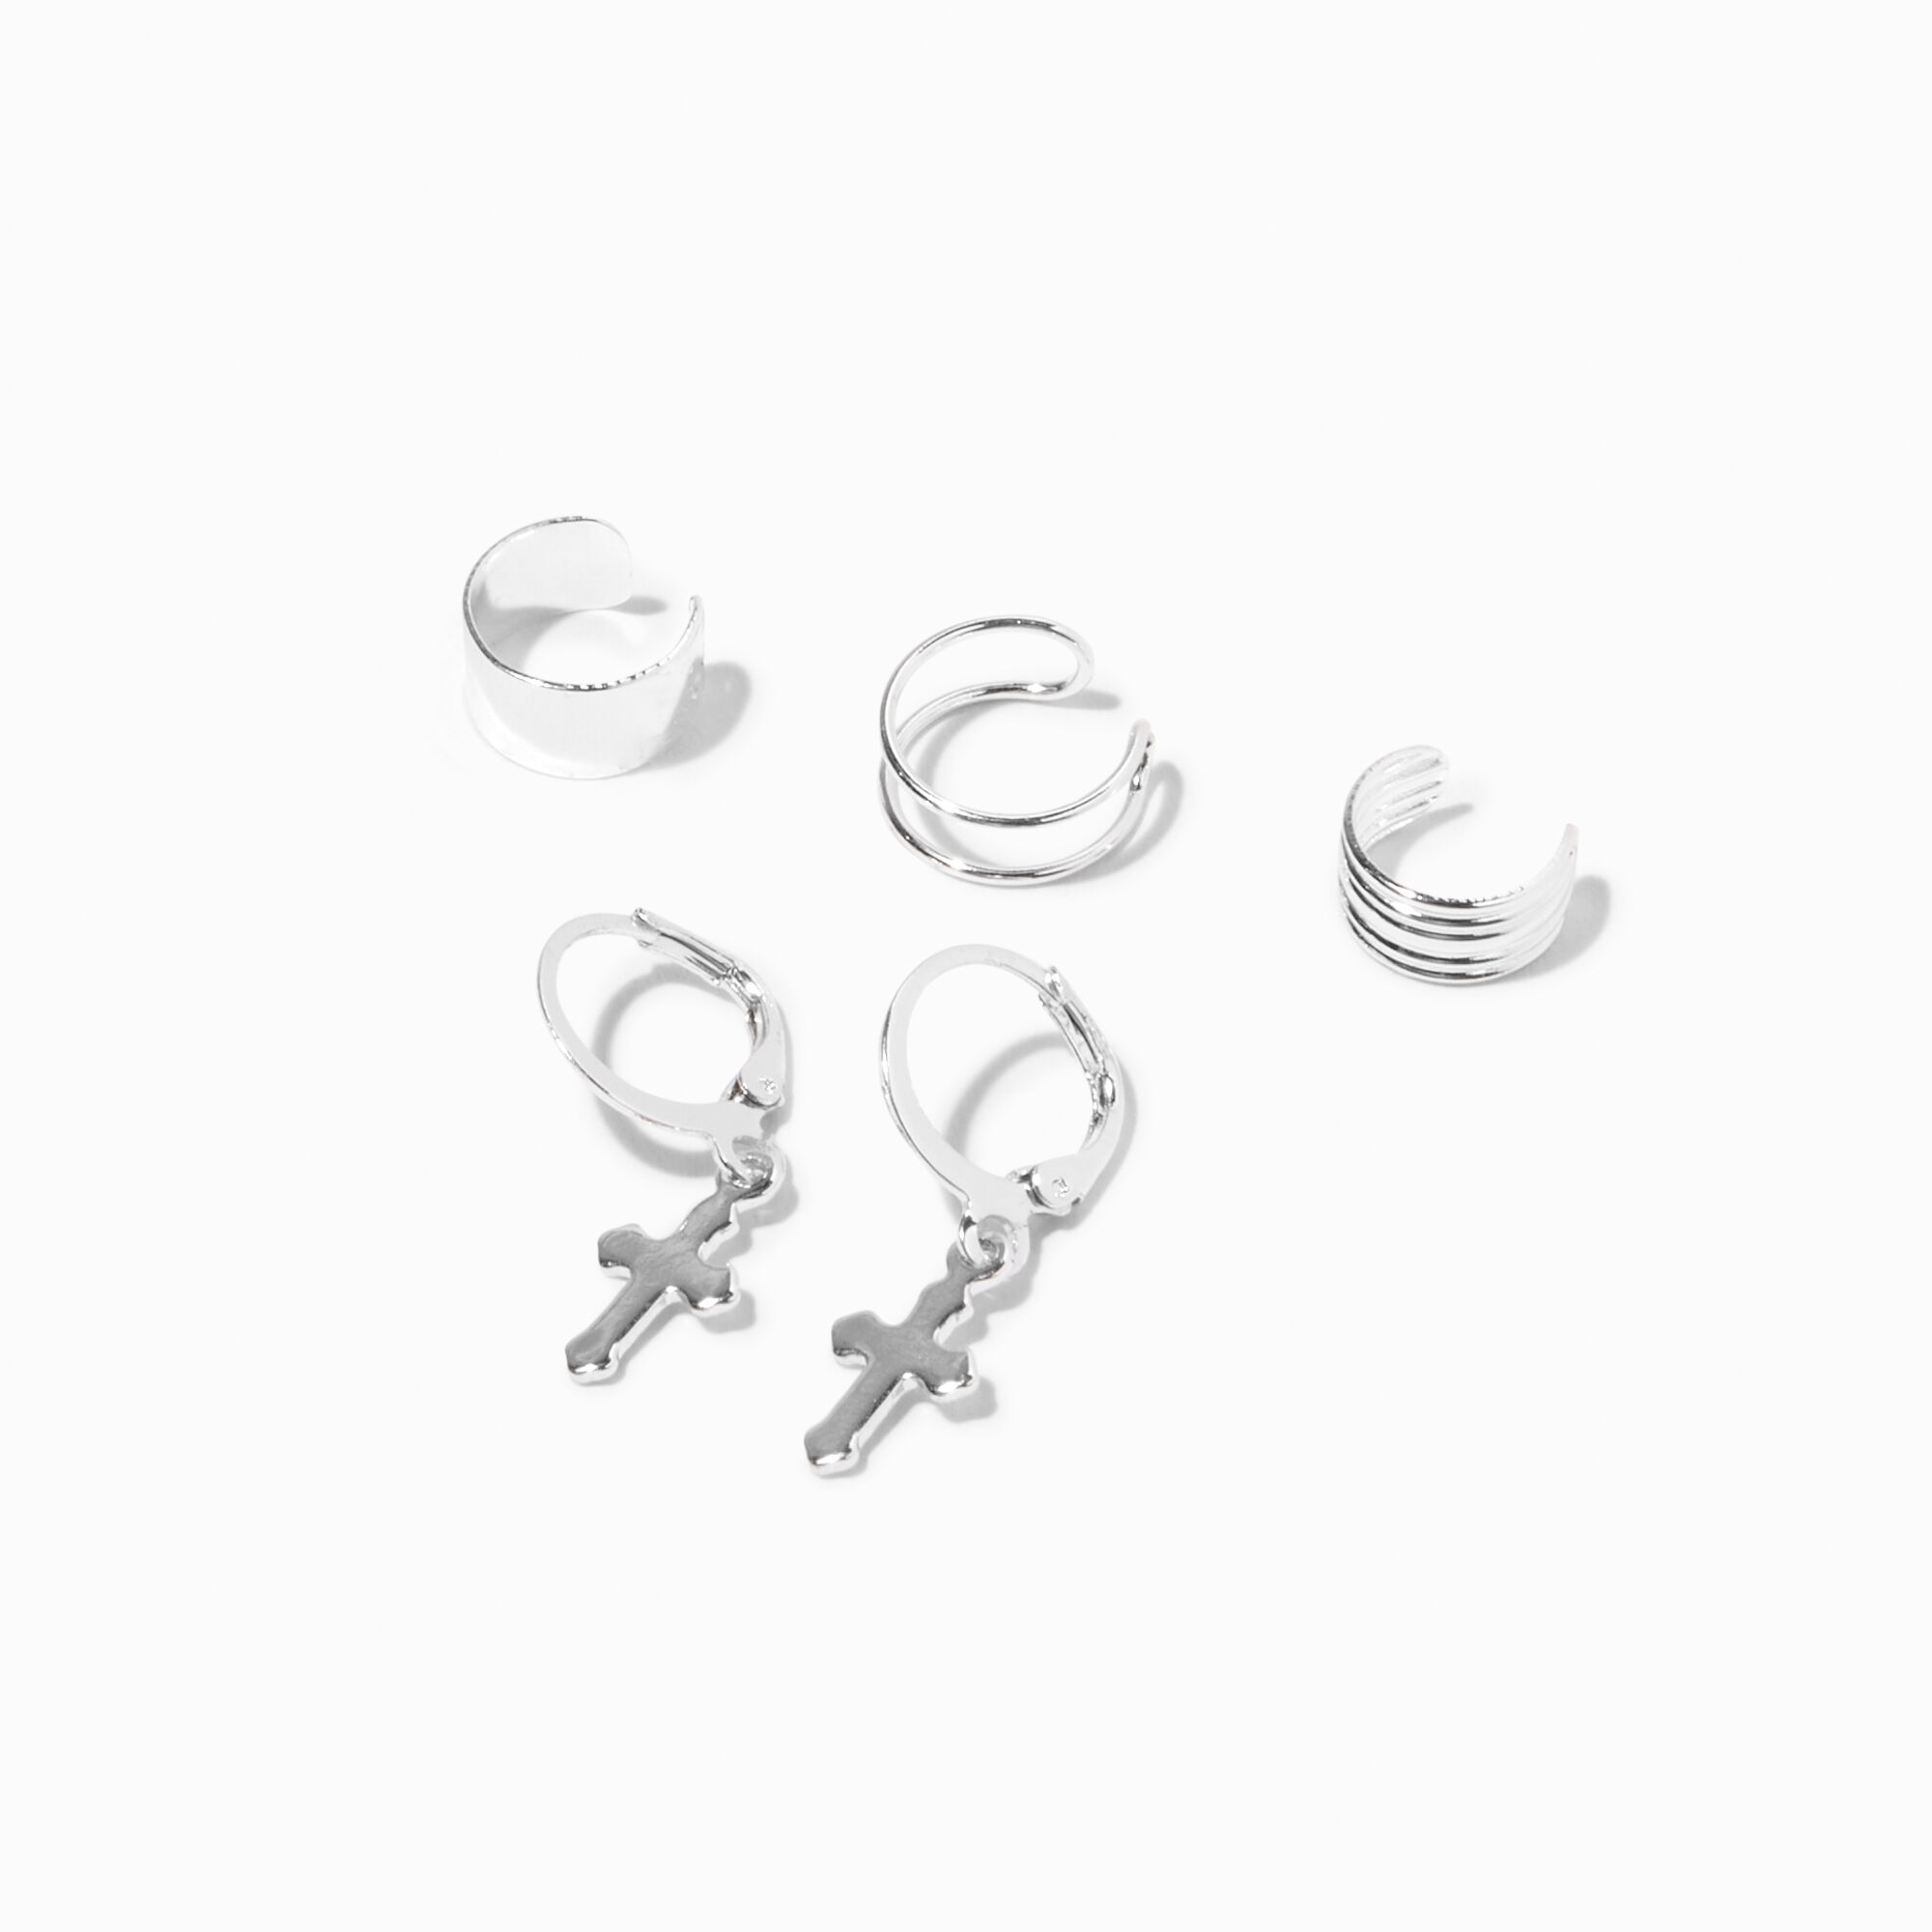 View Claires Mixed Ear Cuff Cross Huggie Hoop Earrings Set 4 Pack Silver information